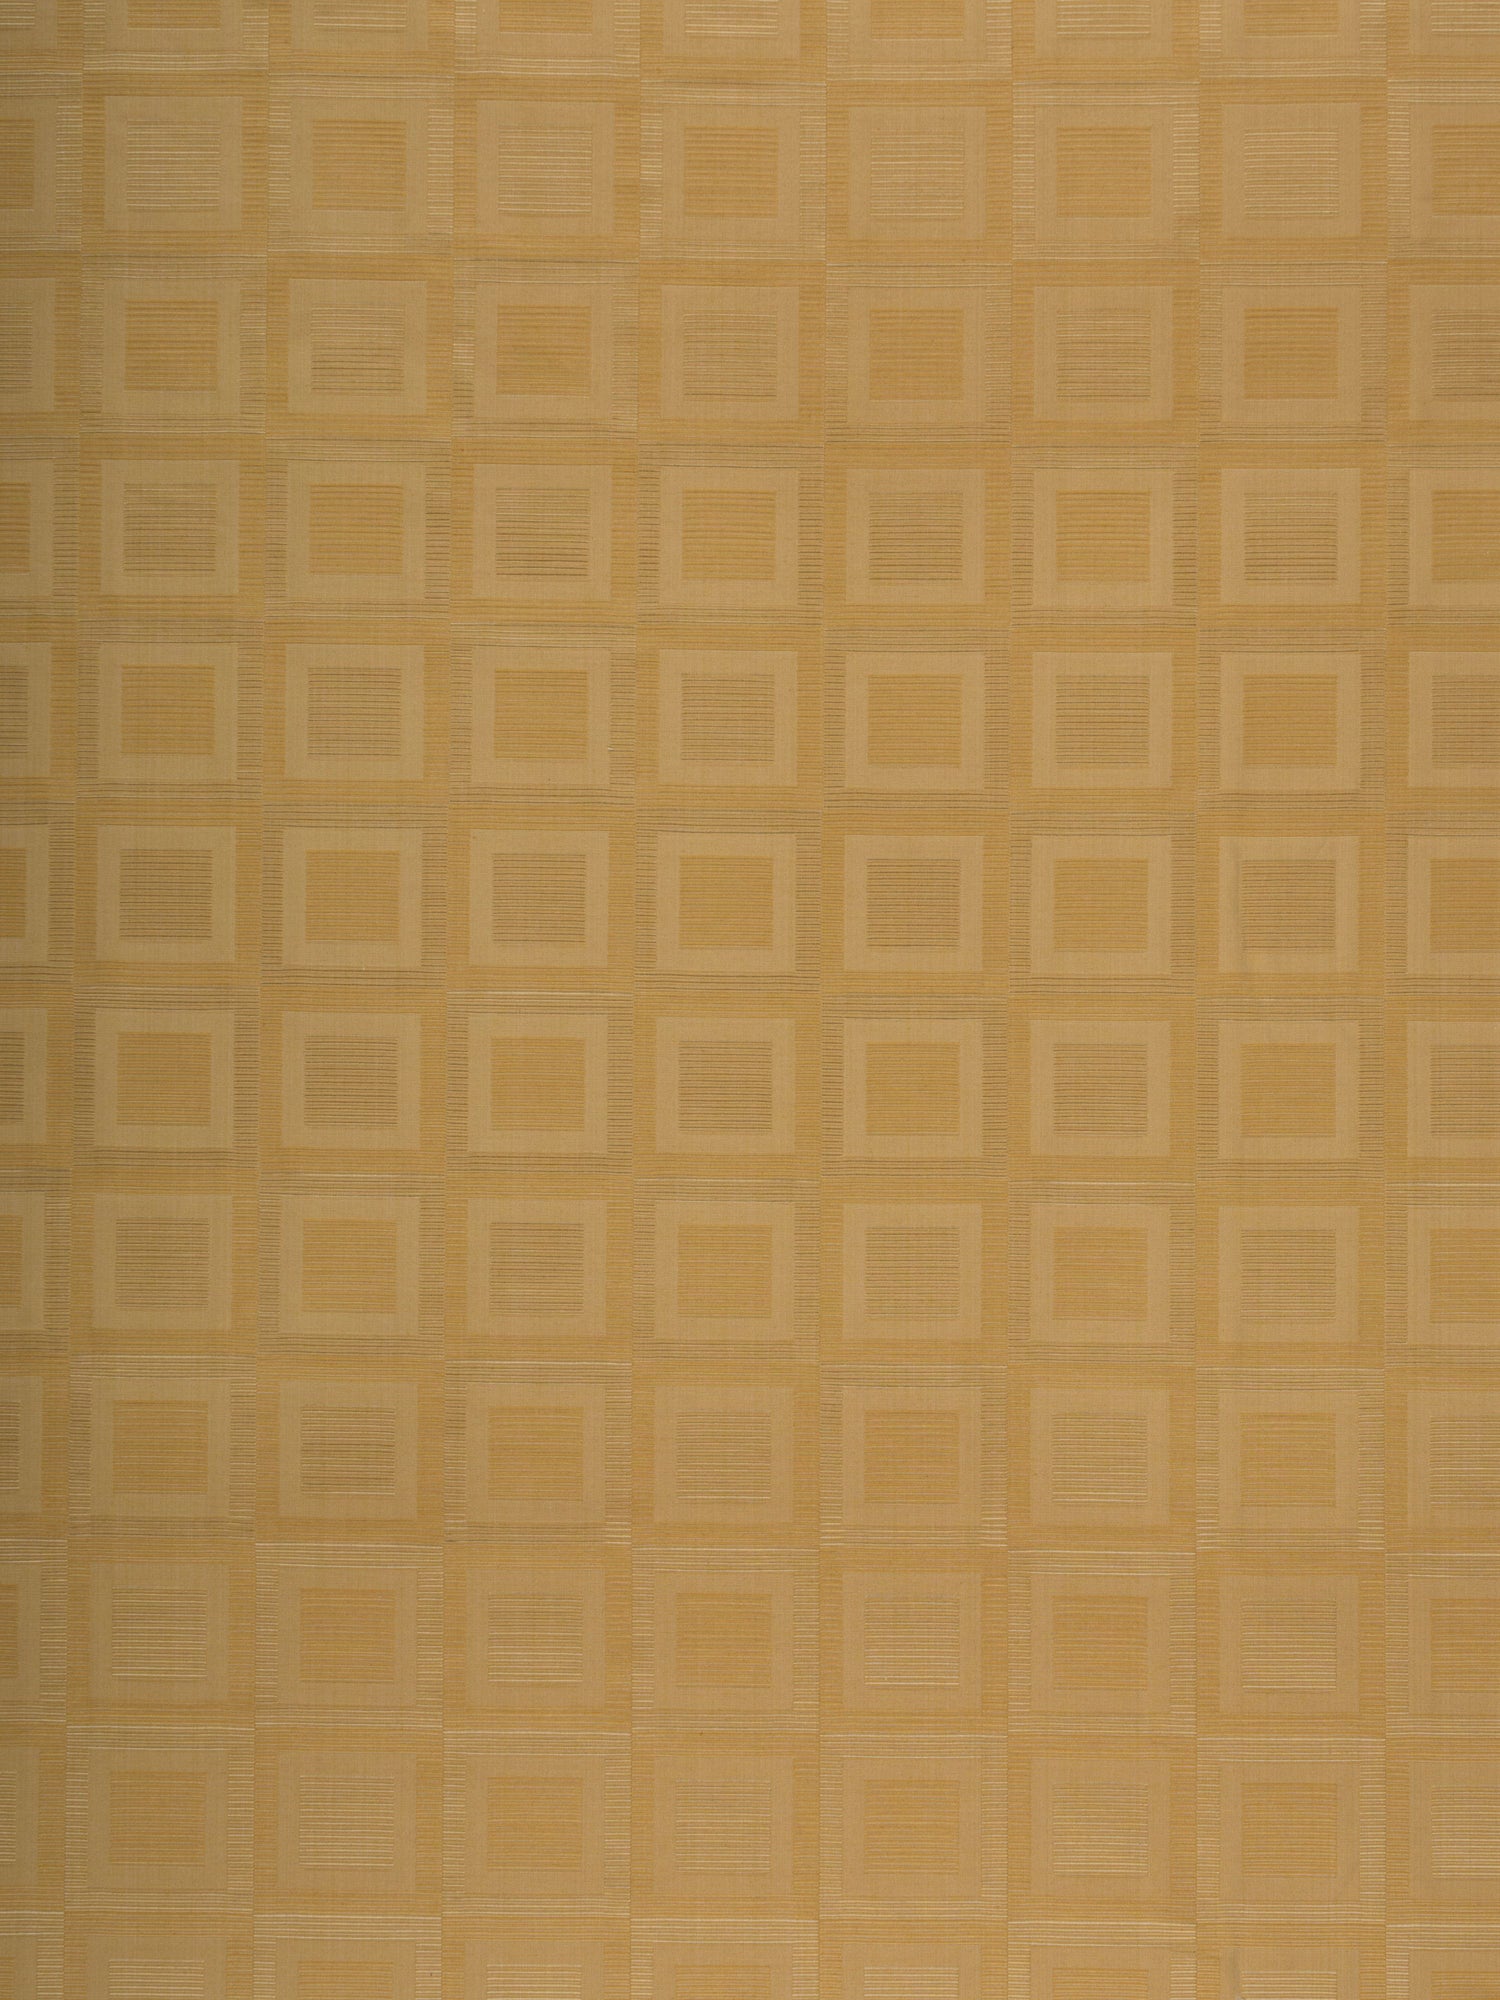 Juliet Square fabric in ginger color - pattern number M0 00031447 - by Scalamandre in the Old World Weavers collection